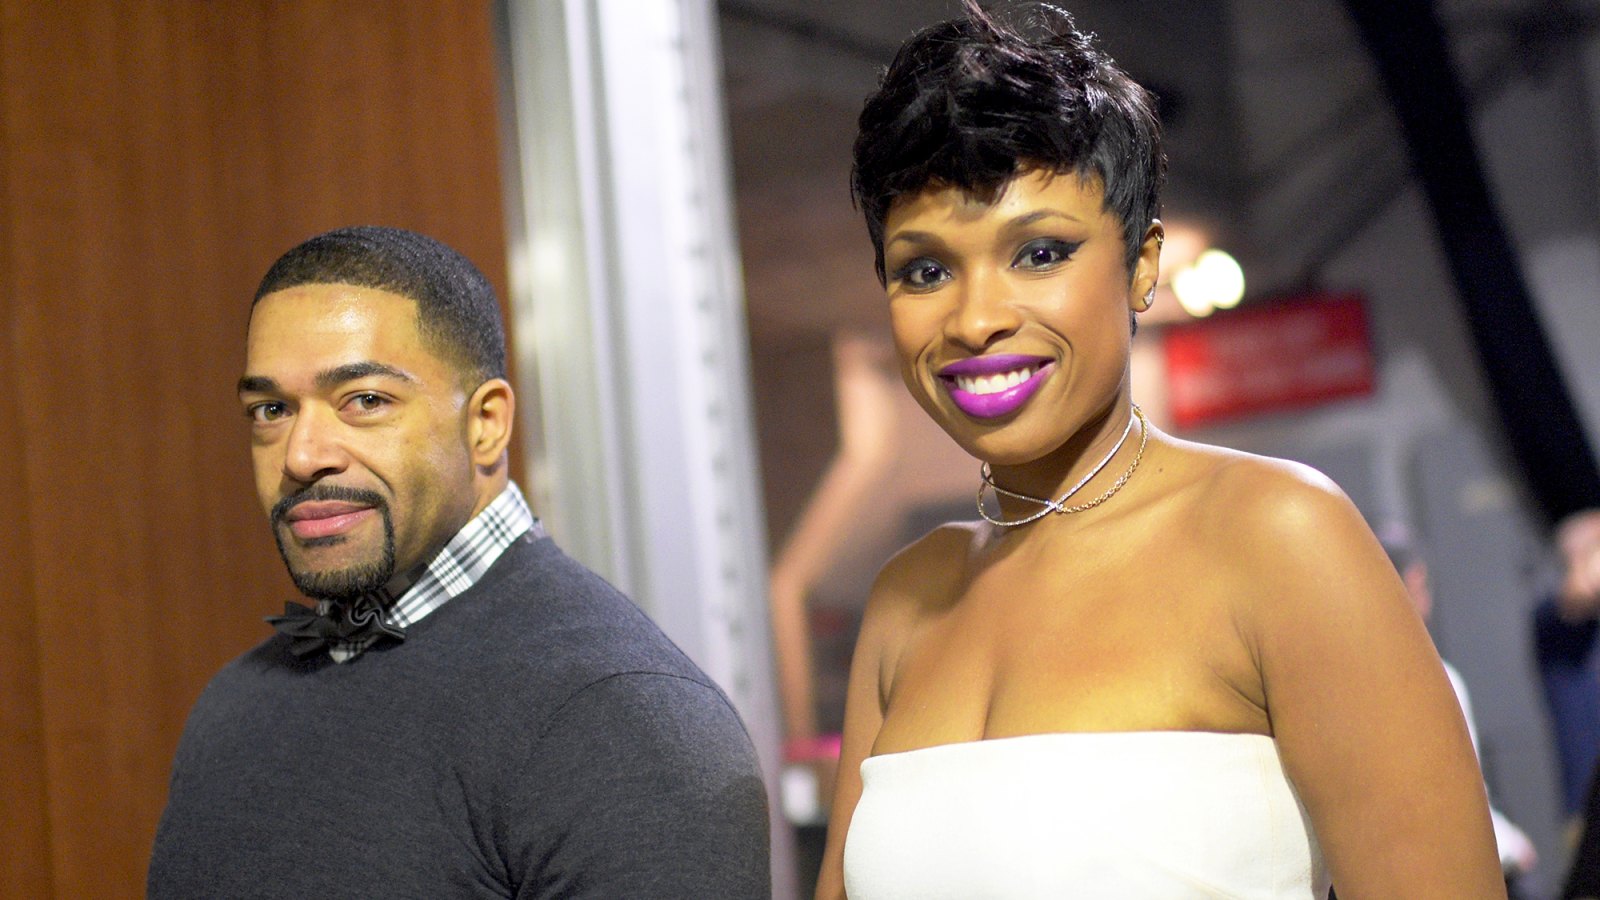 Jennifer Hudson and David Otunga attend The 57th Annual Grammy Awards at Staples Center in Los Angeles, California.